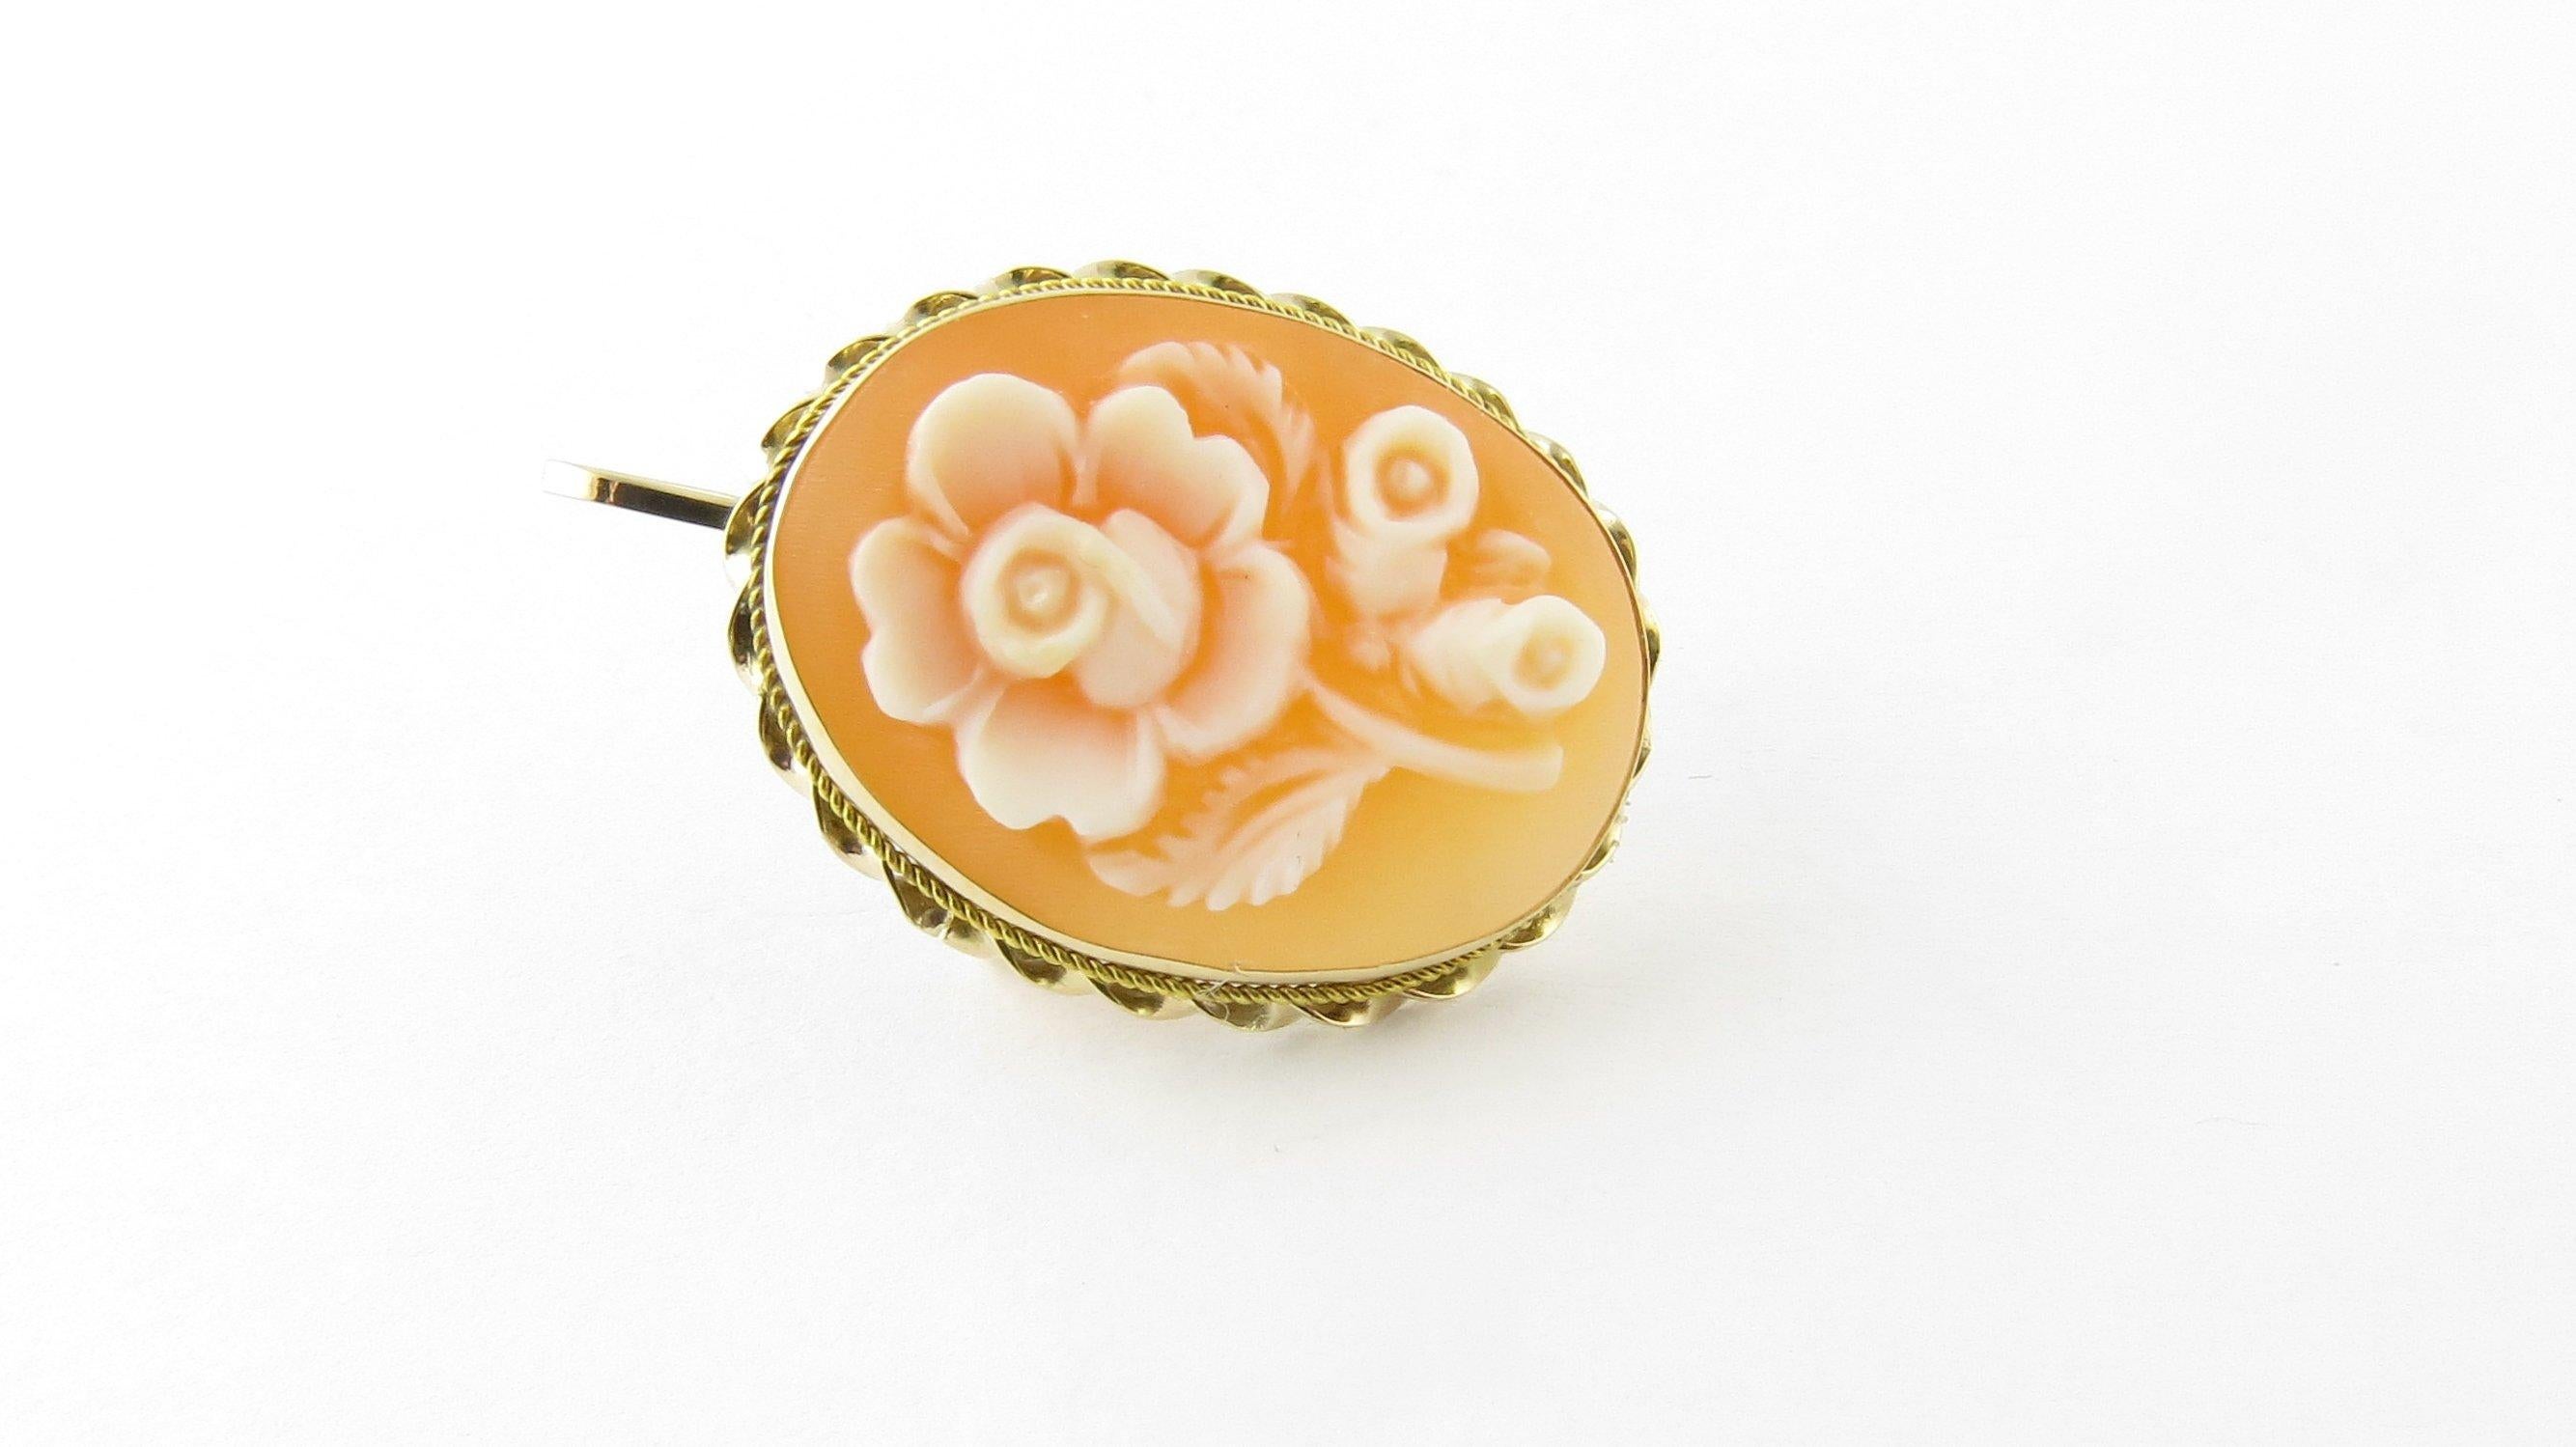 Vintage 14 Karat Yellow Gold Rose Cameo Brooch/Pendant
This lovely floral cameo brooch is set in meticulously detailed 14K yellow gold. Can be worn as a brooch or a pendant. 
Size: 23 mm x 18 mm 
Weight: 2.0 dwt. / 3.2 gr. 
Hallmark: 14K 
Very good